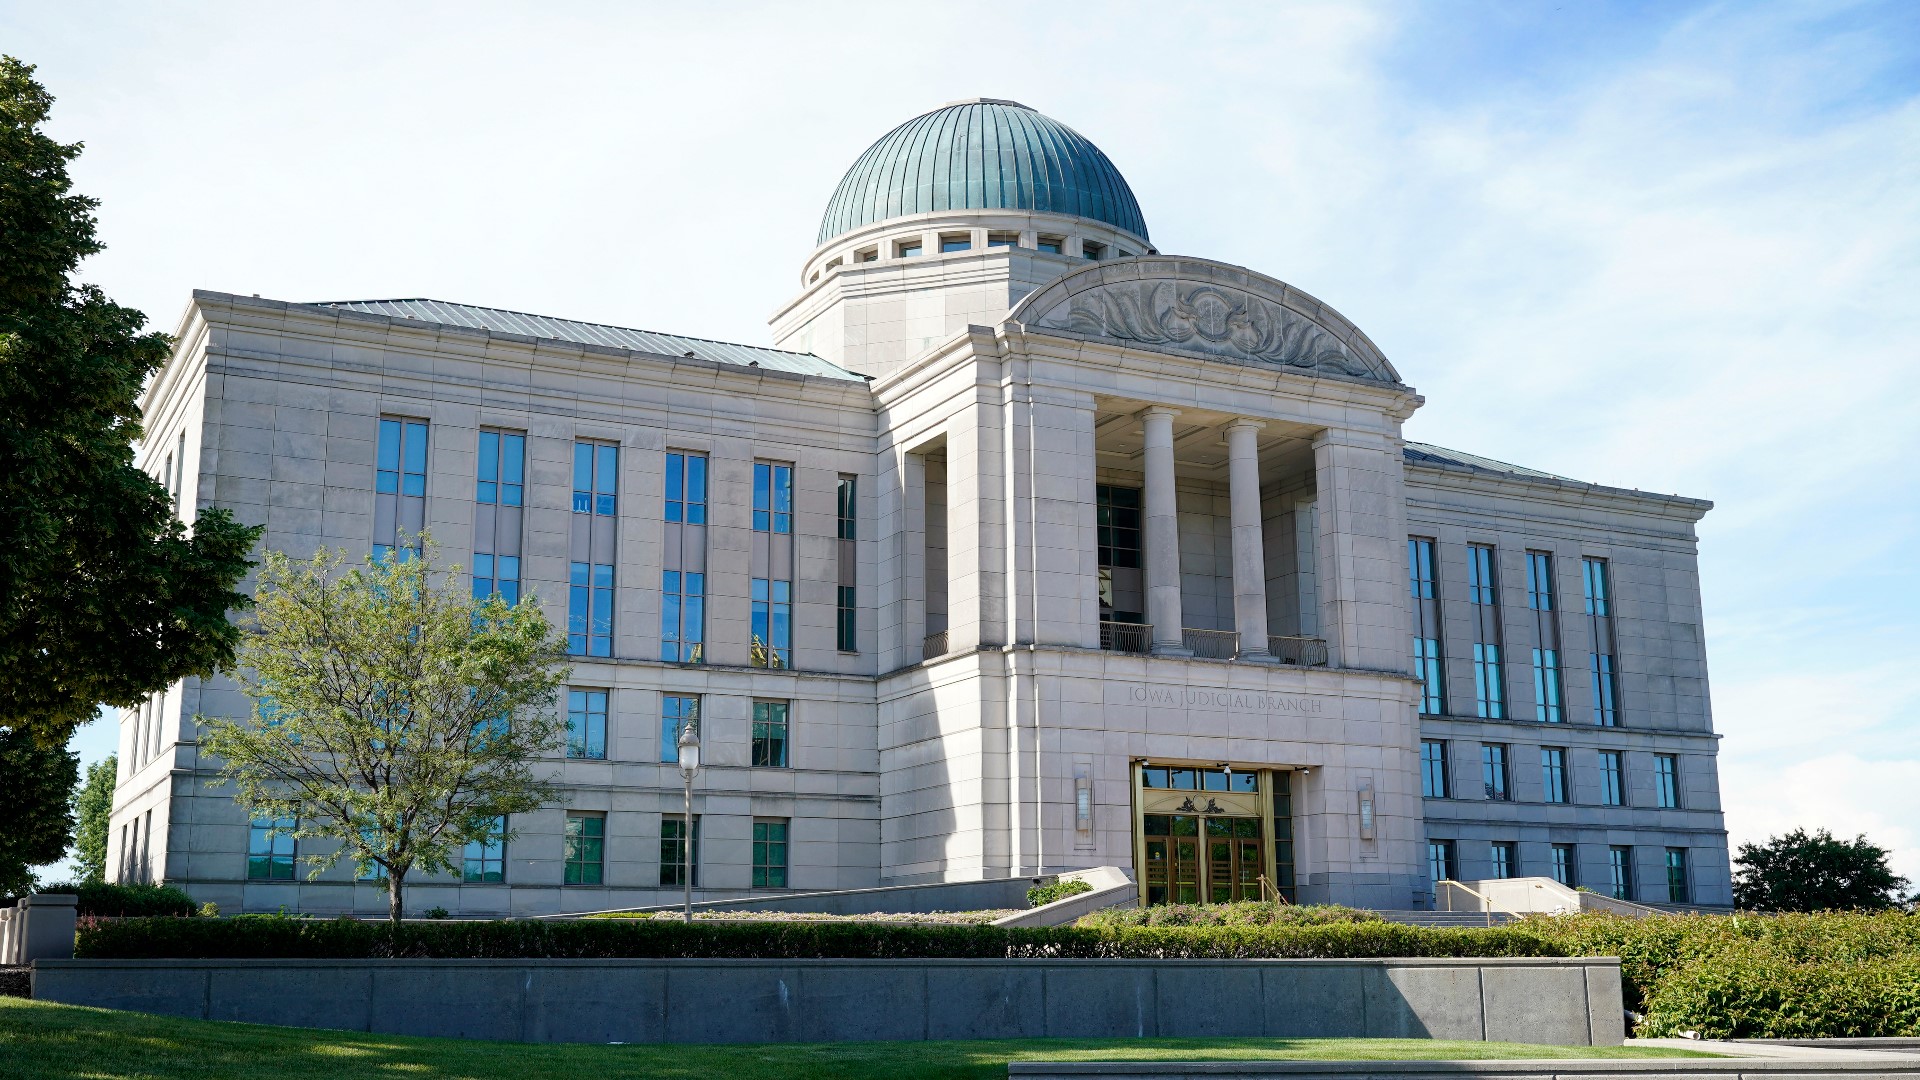 The Iowa Supreme Court's opinion released Friday and written by Justice Edward Mansfield returns a case over the state's 24-hour waiting period to district court.